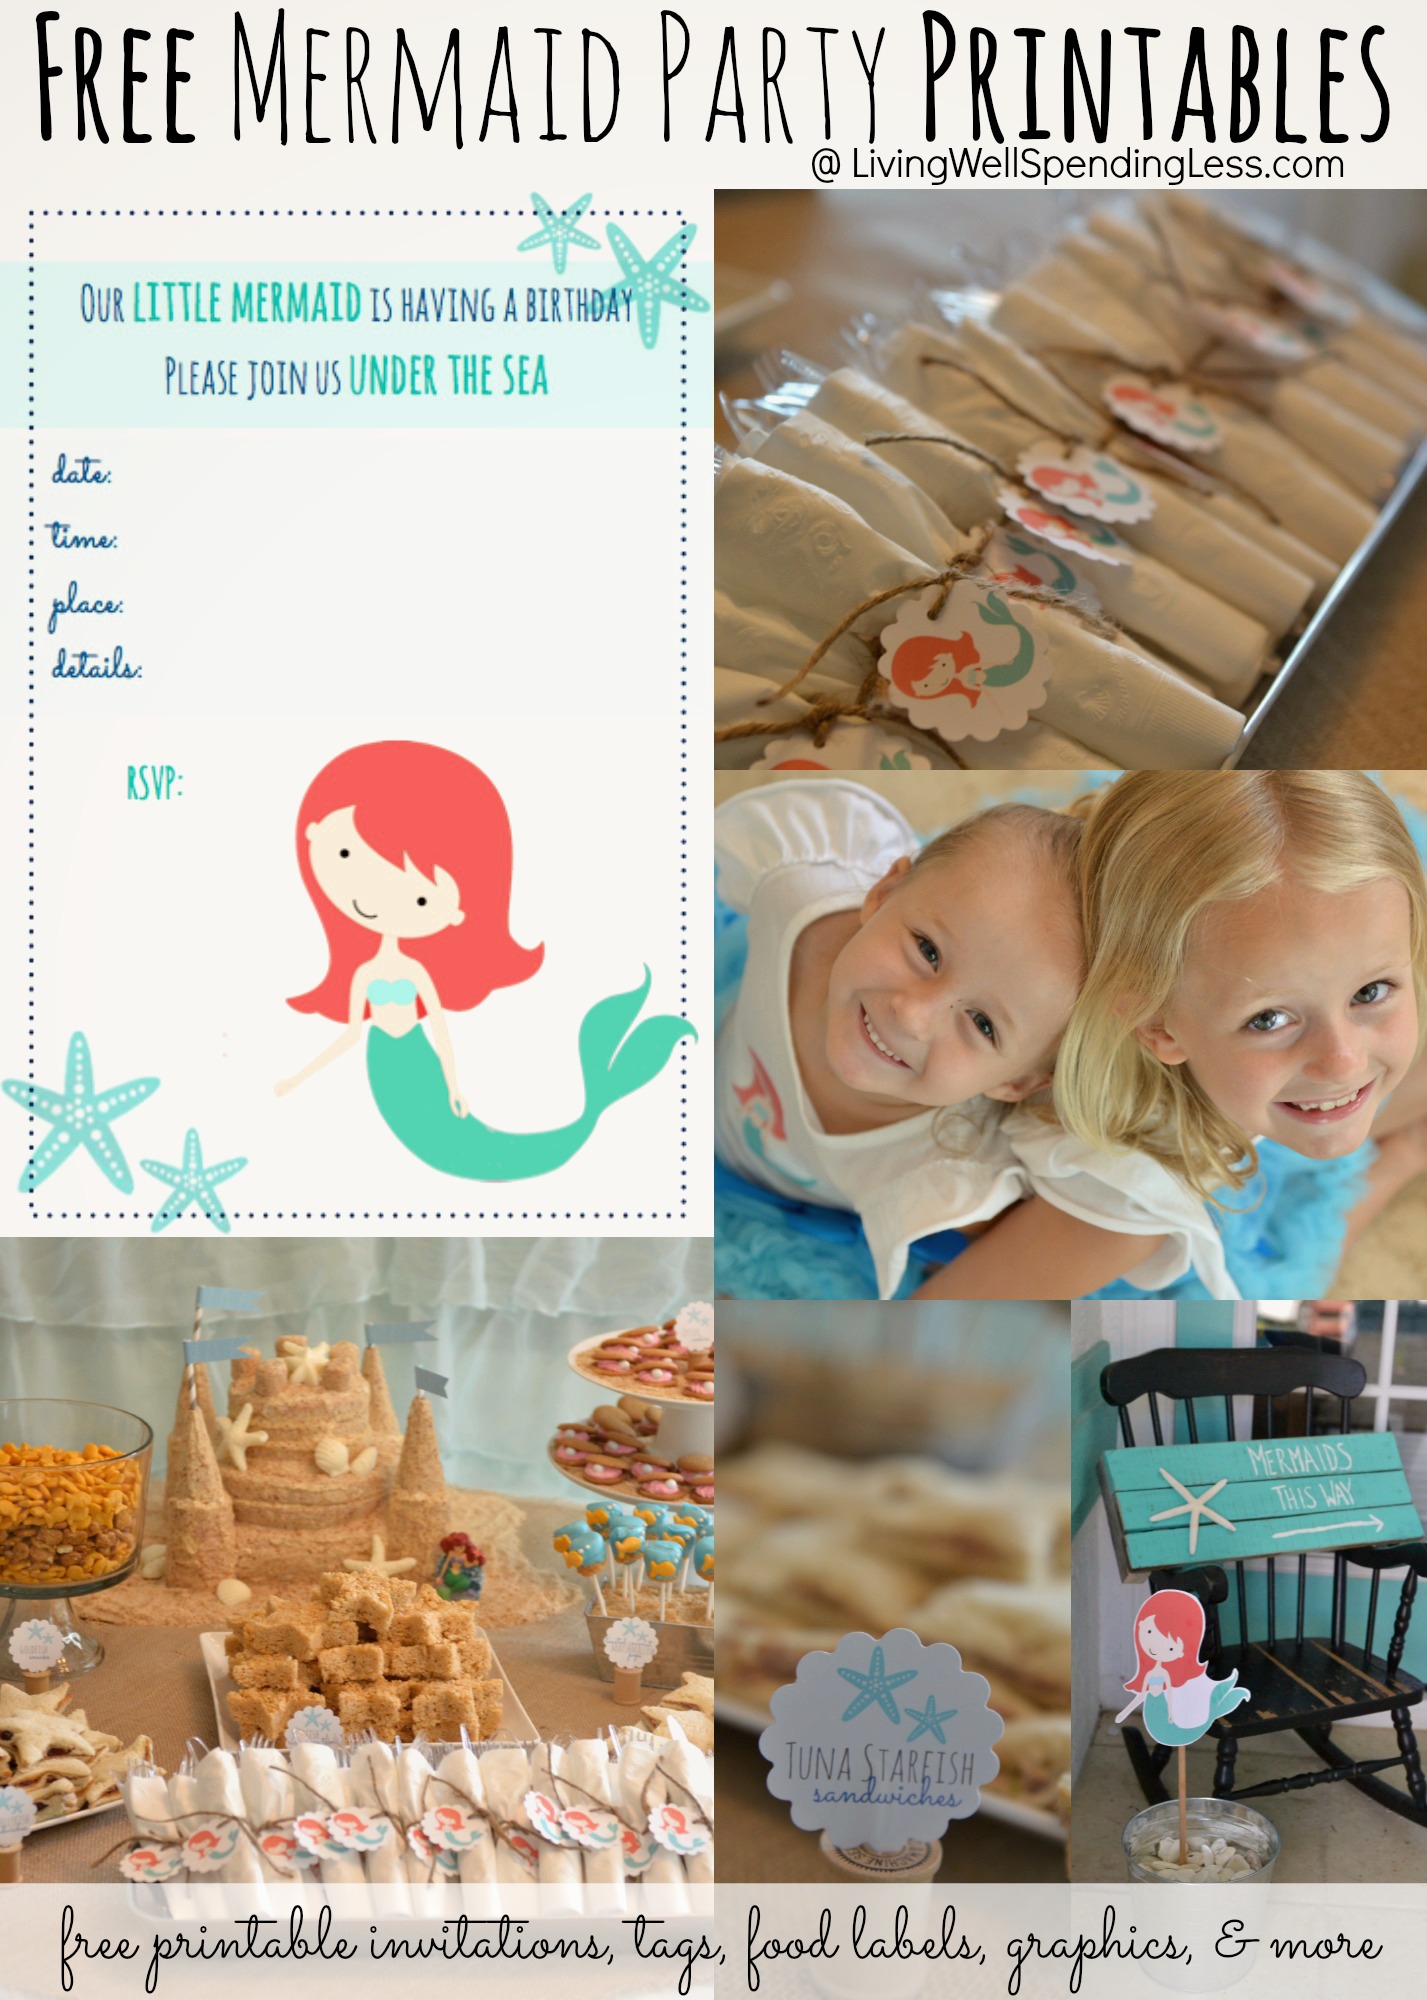 free-mermaid-party-printables-cute-printable-invitations-tags-food-labels-graphics-more